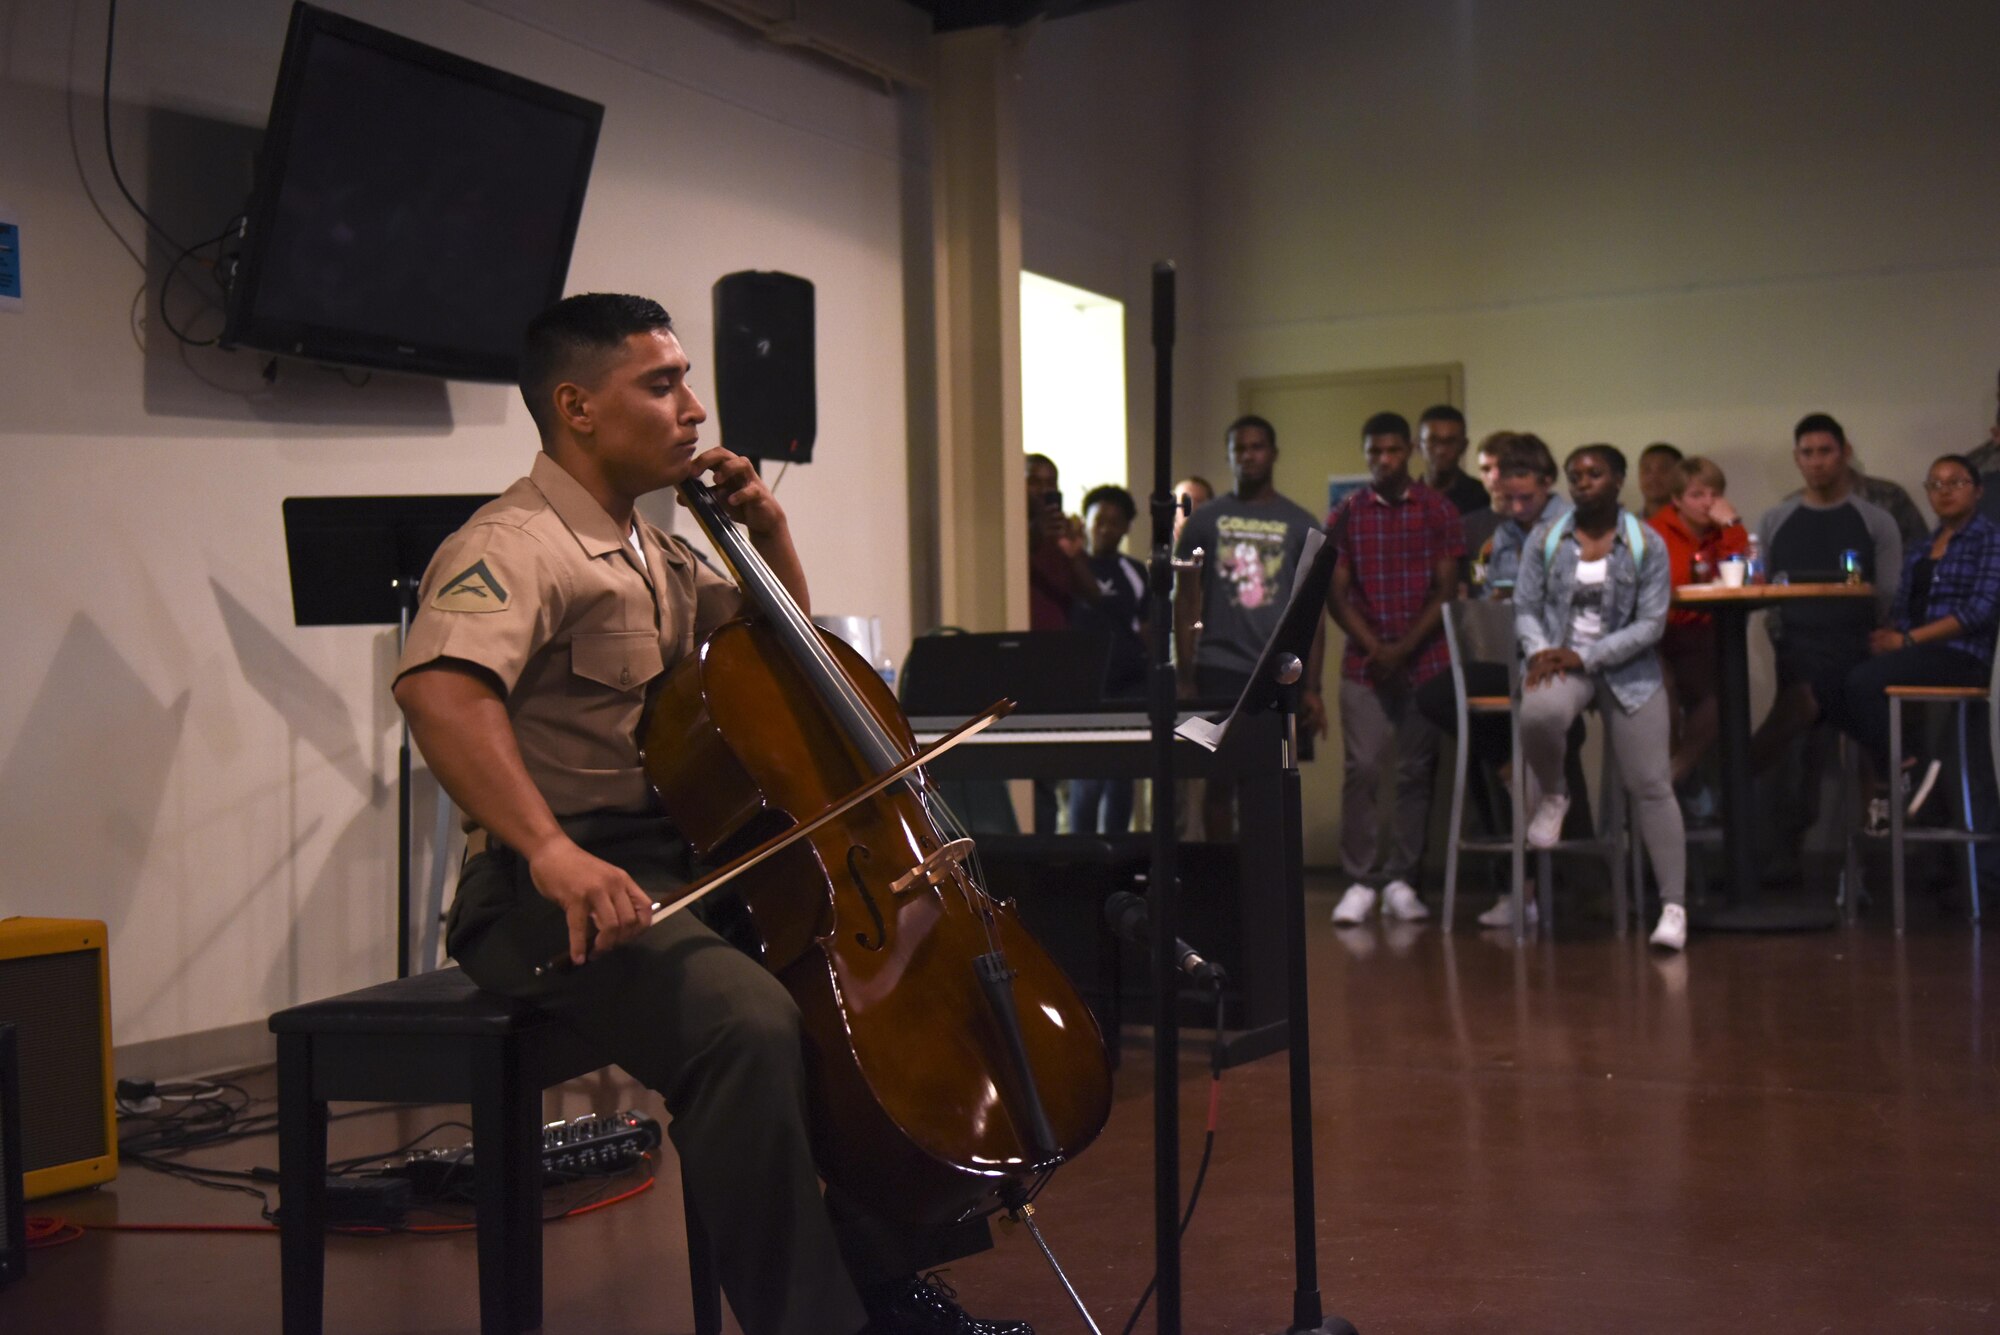 Goodfellow students watch a U.S. Marine playing the cello at Crossroads Student Center on Goodfellow Air Force Base, Texas, Aug. 13, 2016. The cellist demonstrated his skill in front of the crowd as part of Goodfellow’s Got Talent. (U.S. Air Force photo by Airman 1st Class Chase Sousa/Released)